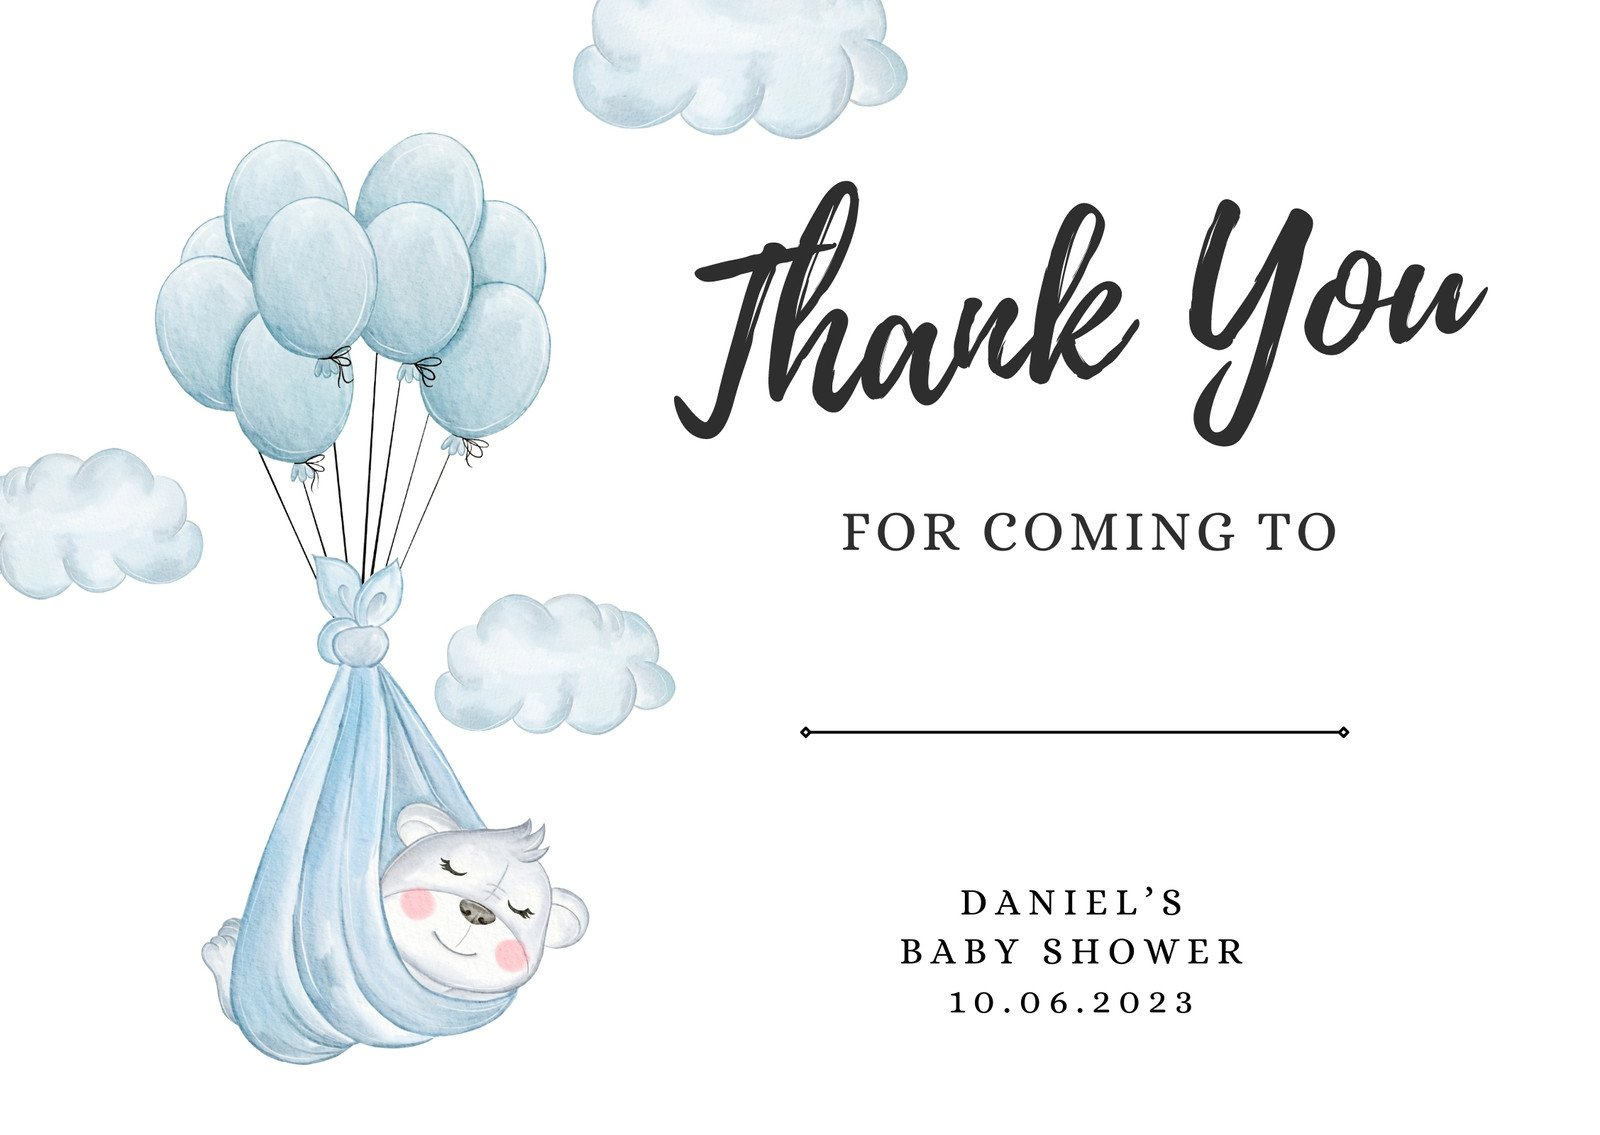 Free Custom Printable Baby Shower Card Templates | Canva throughout Free Printable Baby Registry Cards